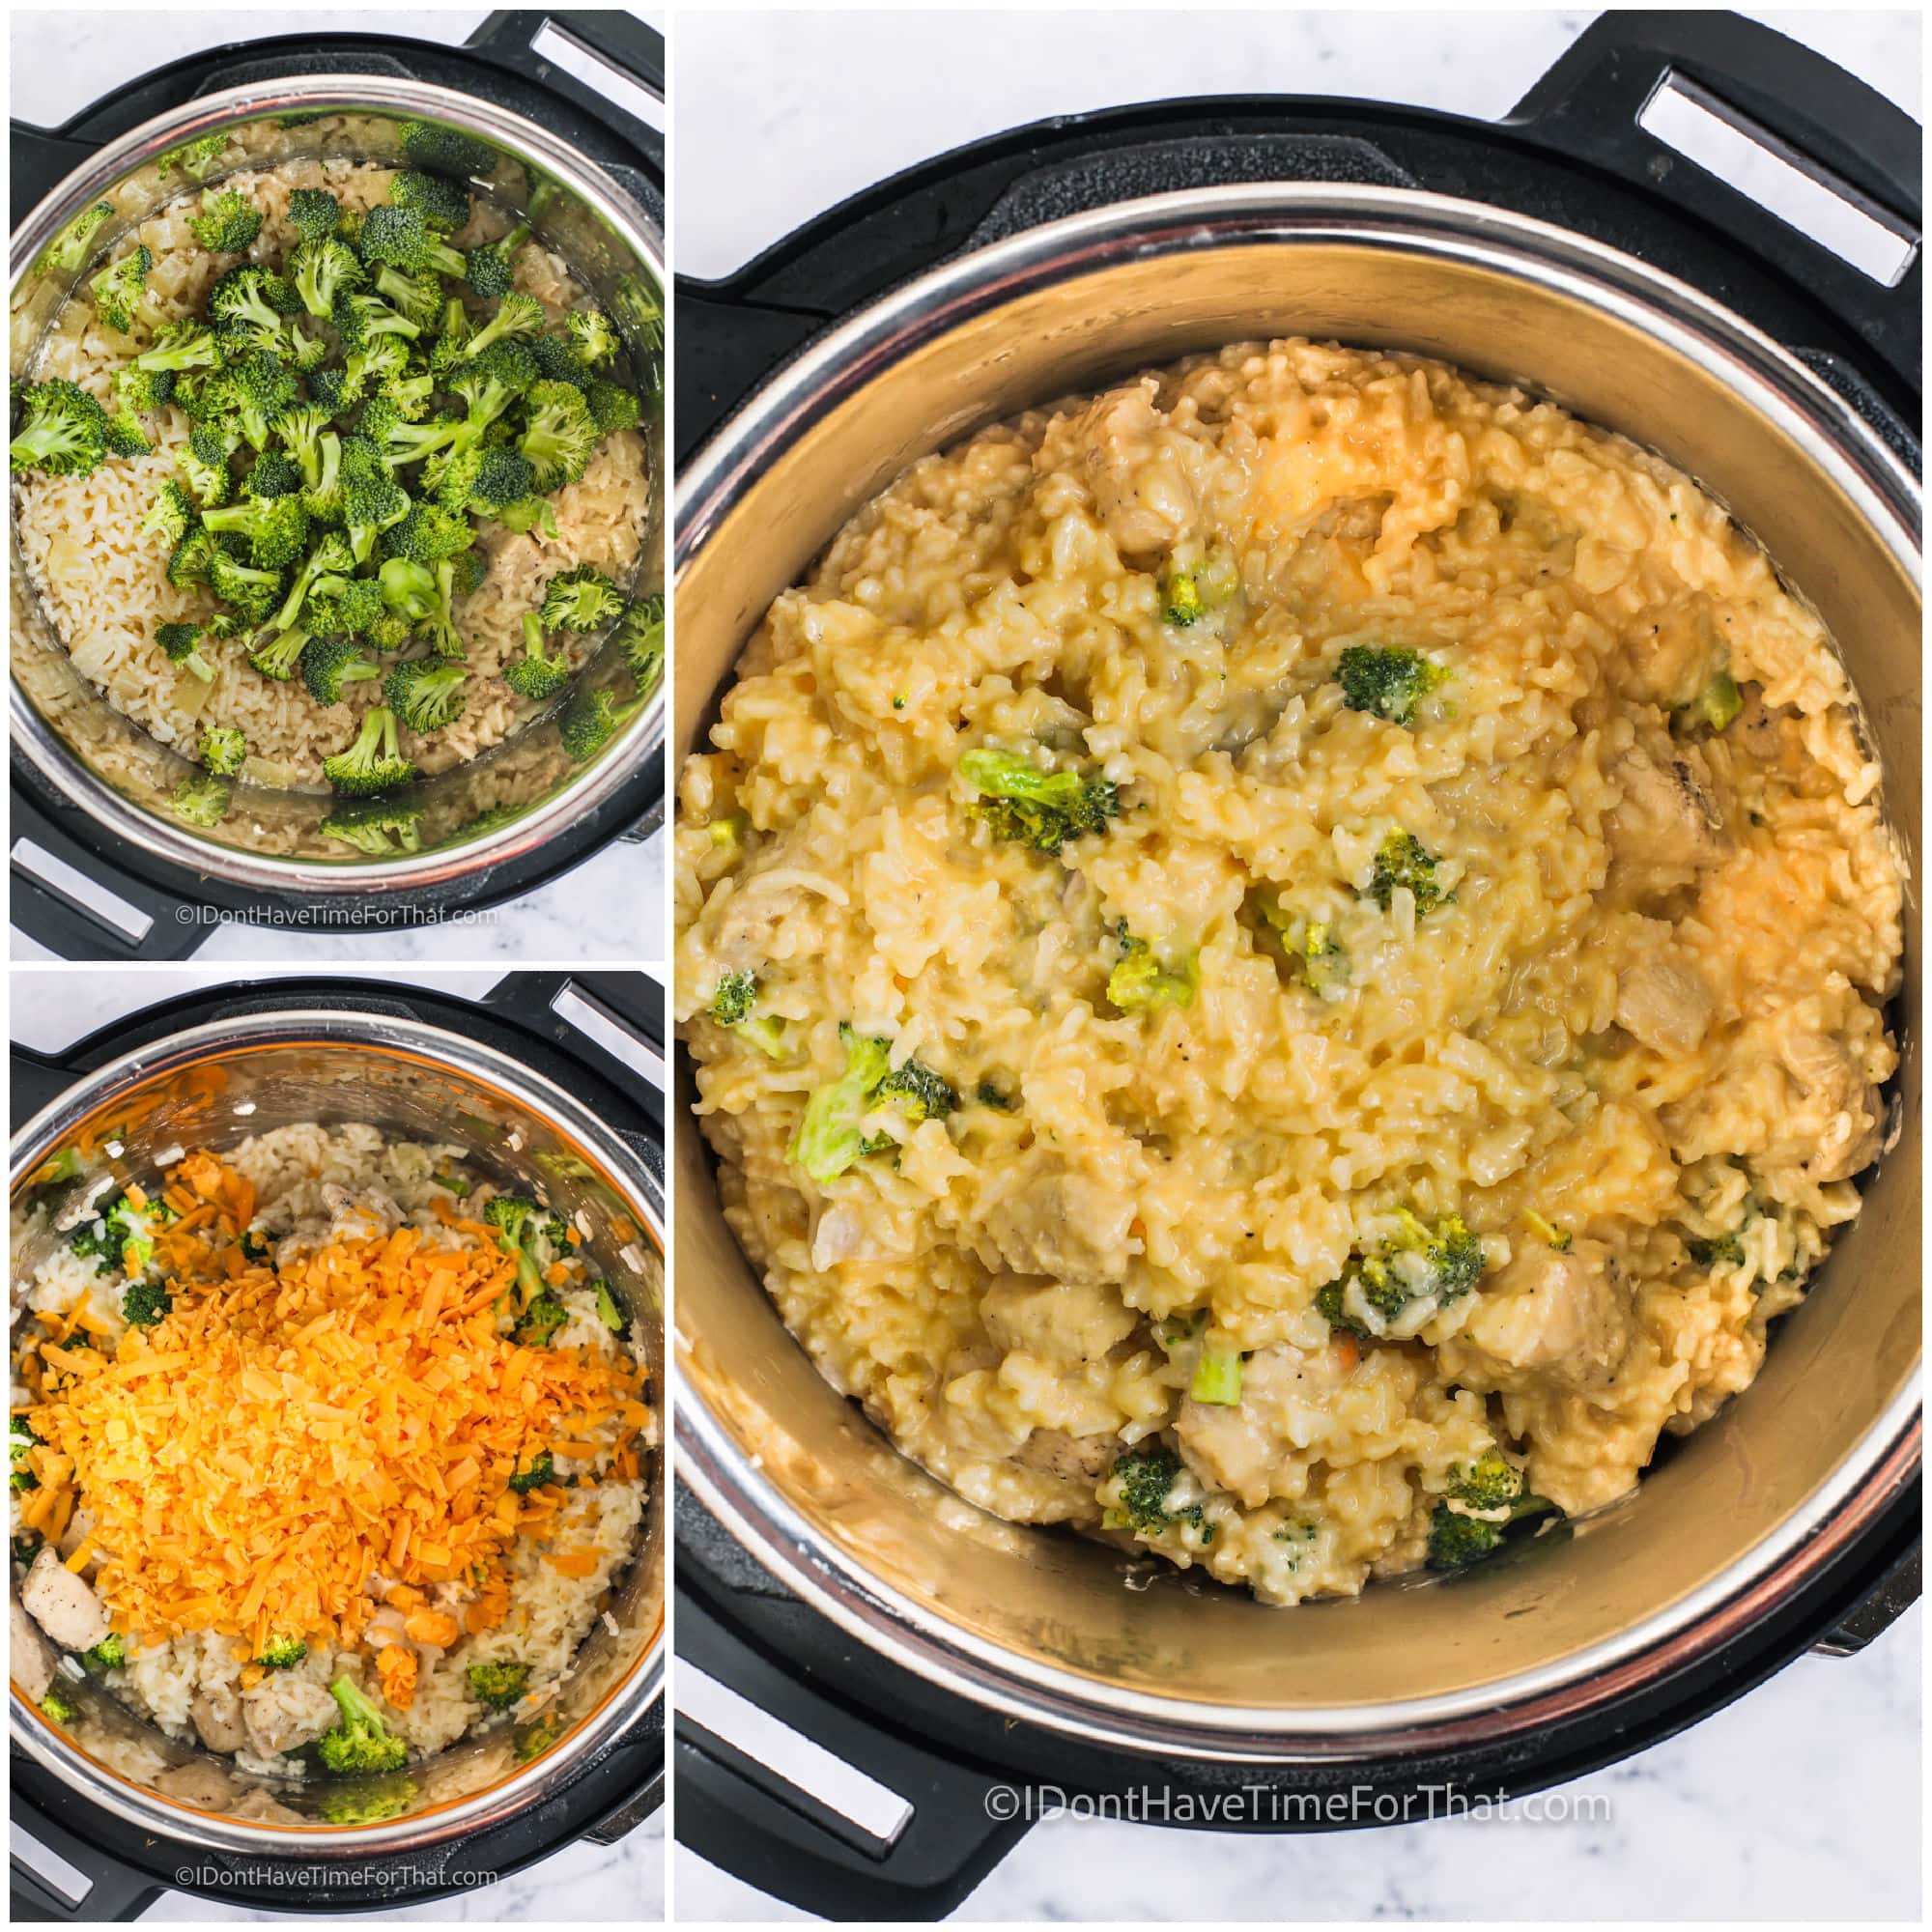 process of adding broccoli and cheese to pot to make Instant Pot Chicken Broccoli and Rice